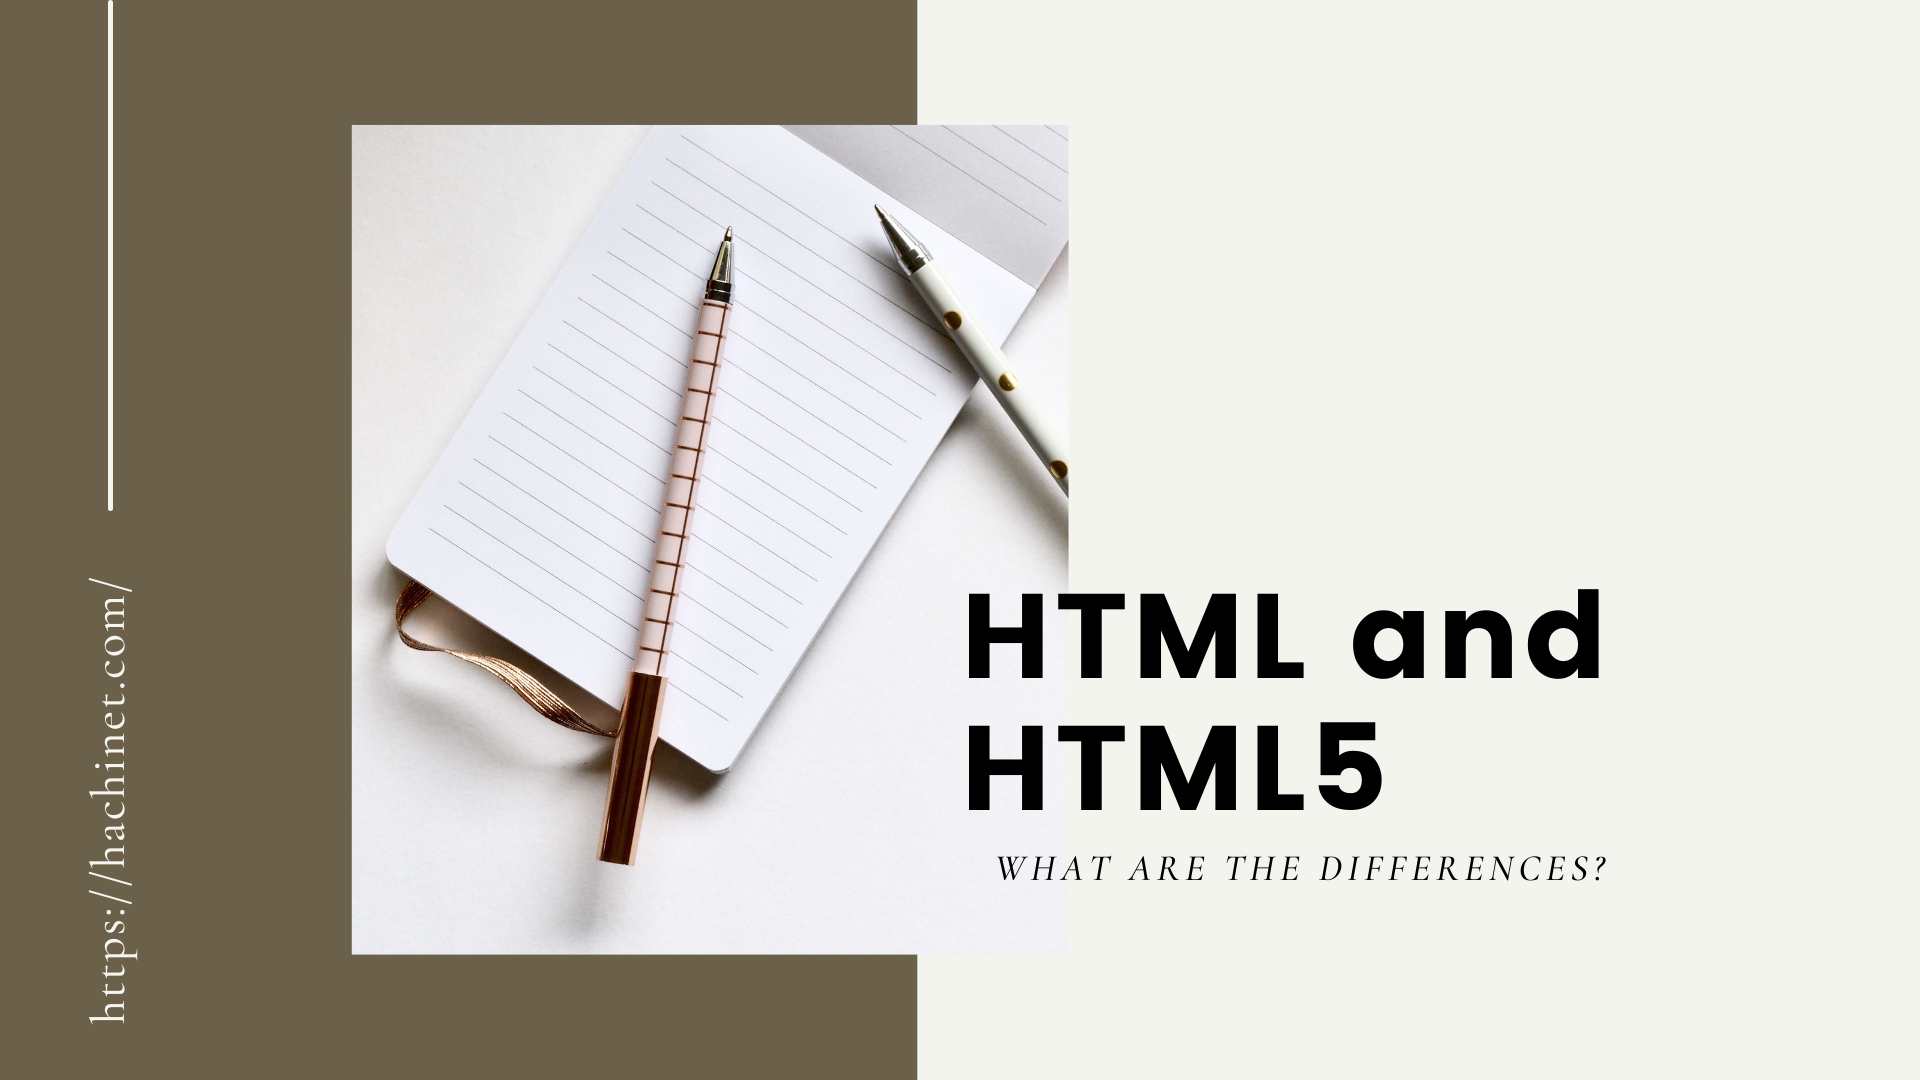 HTML and HTML5: What are the differences? HTML5's strengths